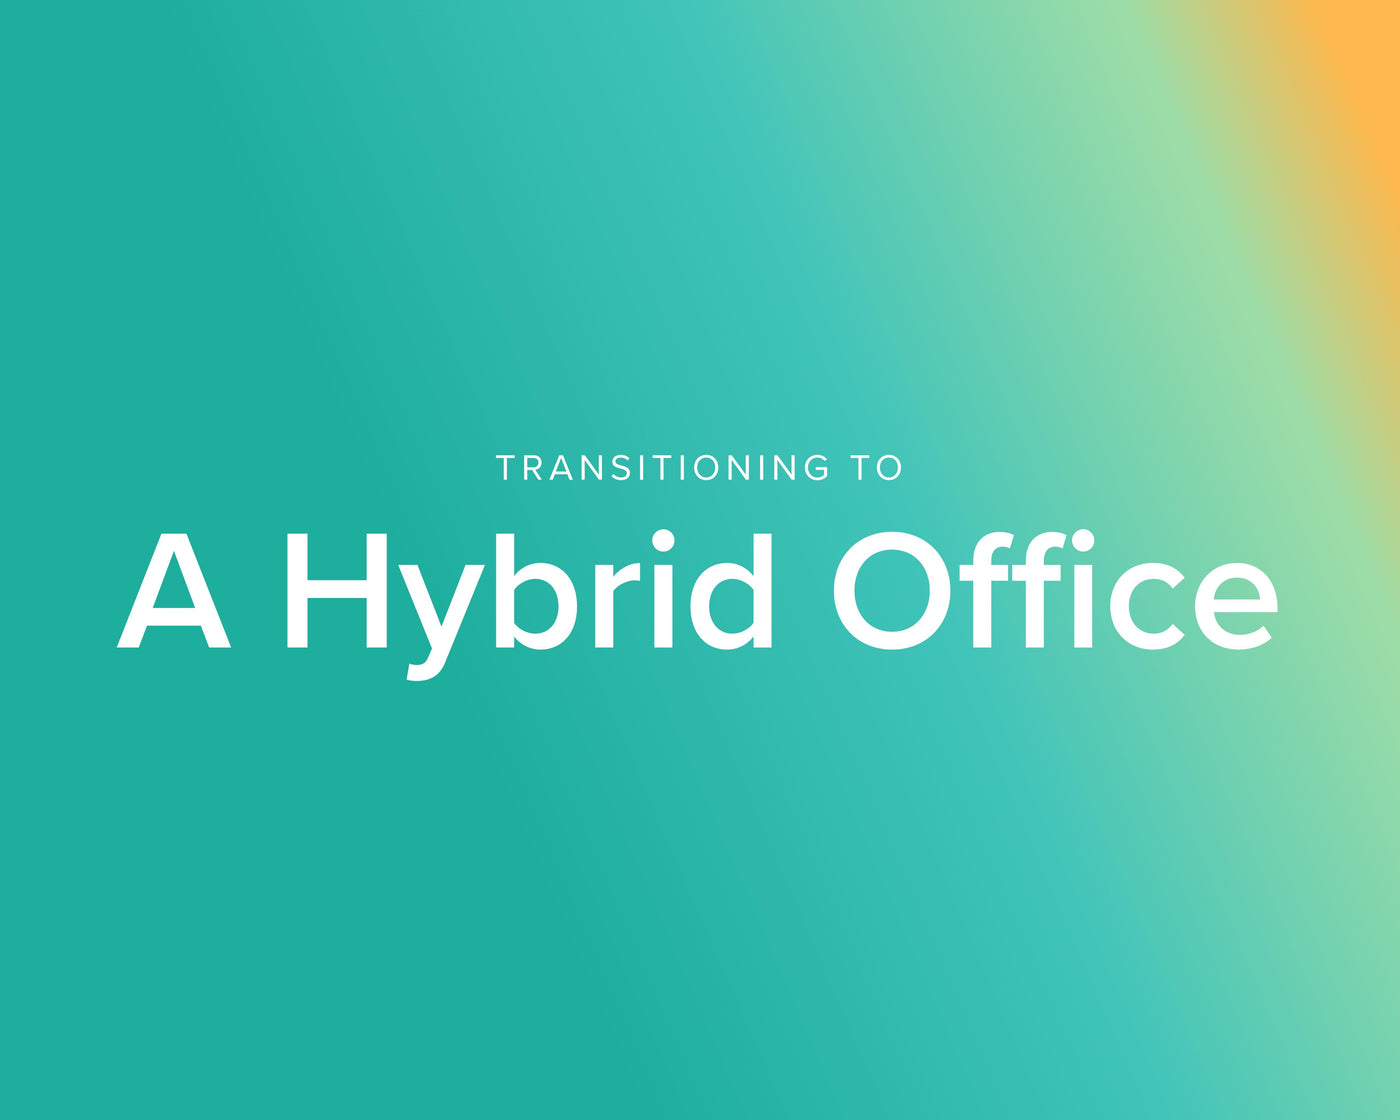 Transitioning to a Hybrid Office